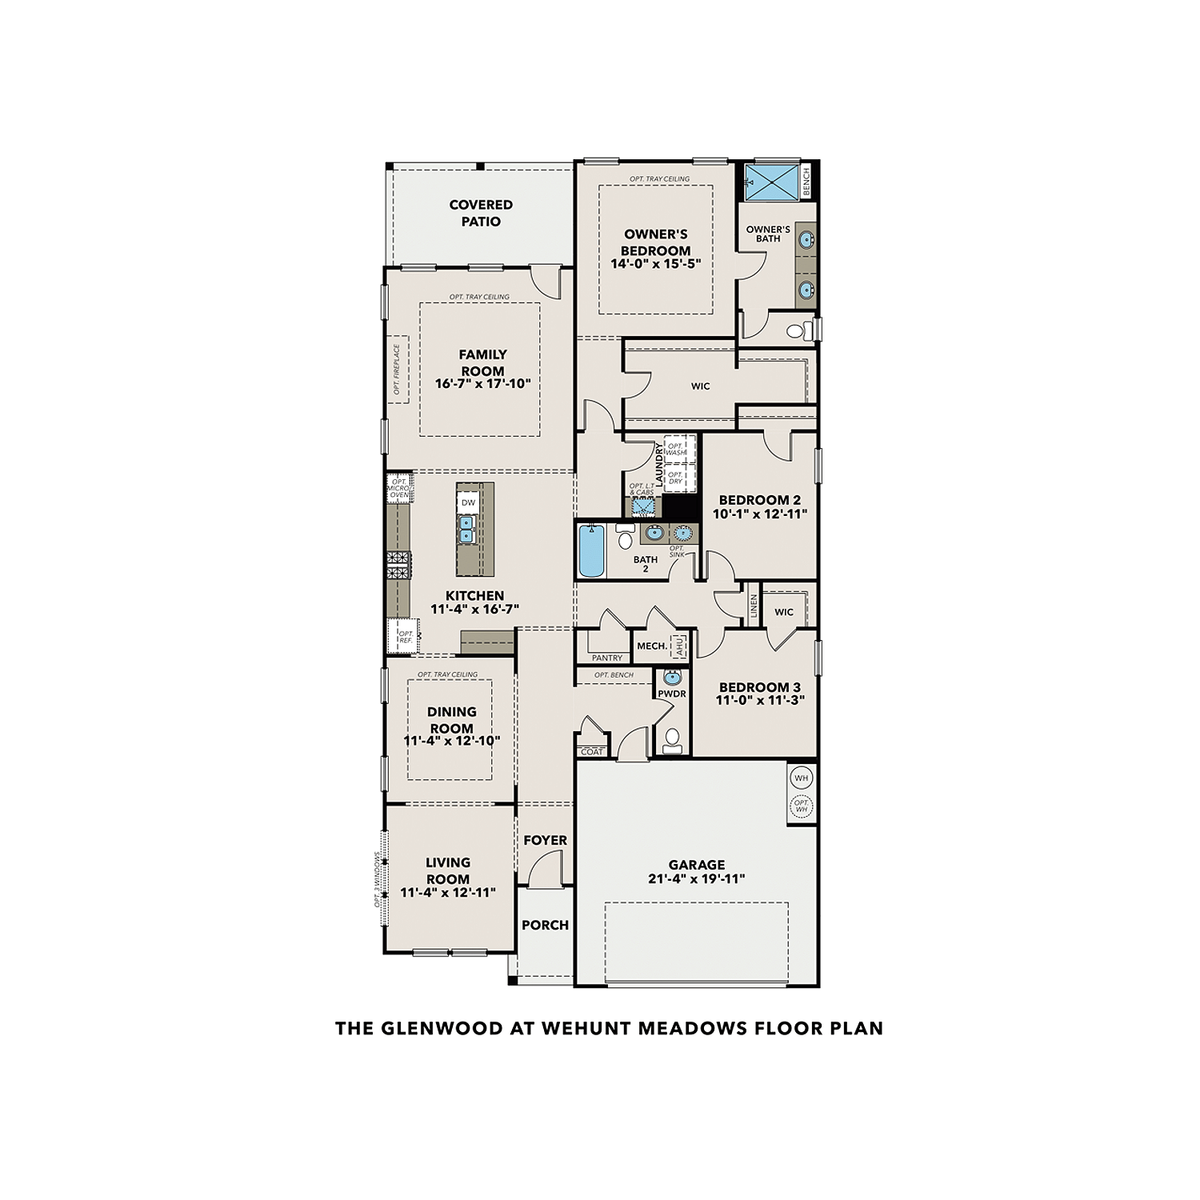 1 - The Glenwood A at Wehunt Meadows buildable floor plan layout in Davidson Homes' Wehunt Meadows community.